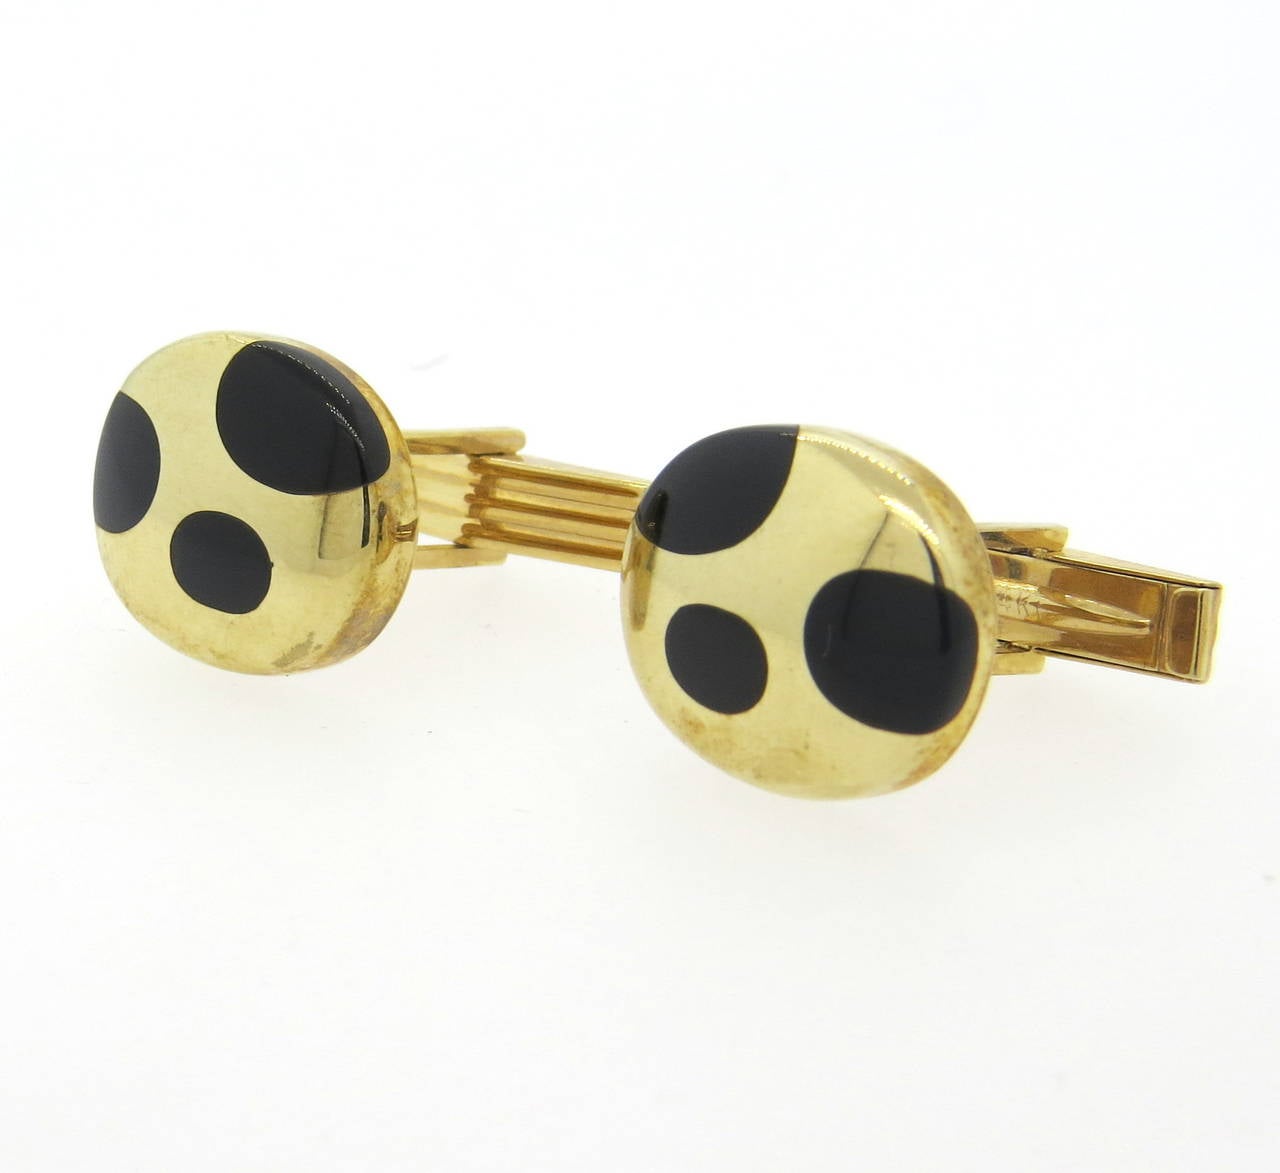 14k gold cufflinks with onyx inlay, measuring 20mm x 16mm. Weight - 13.3 grams